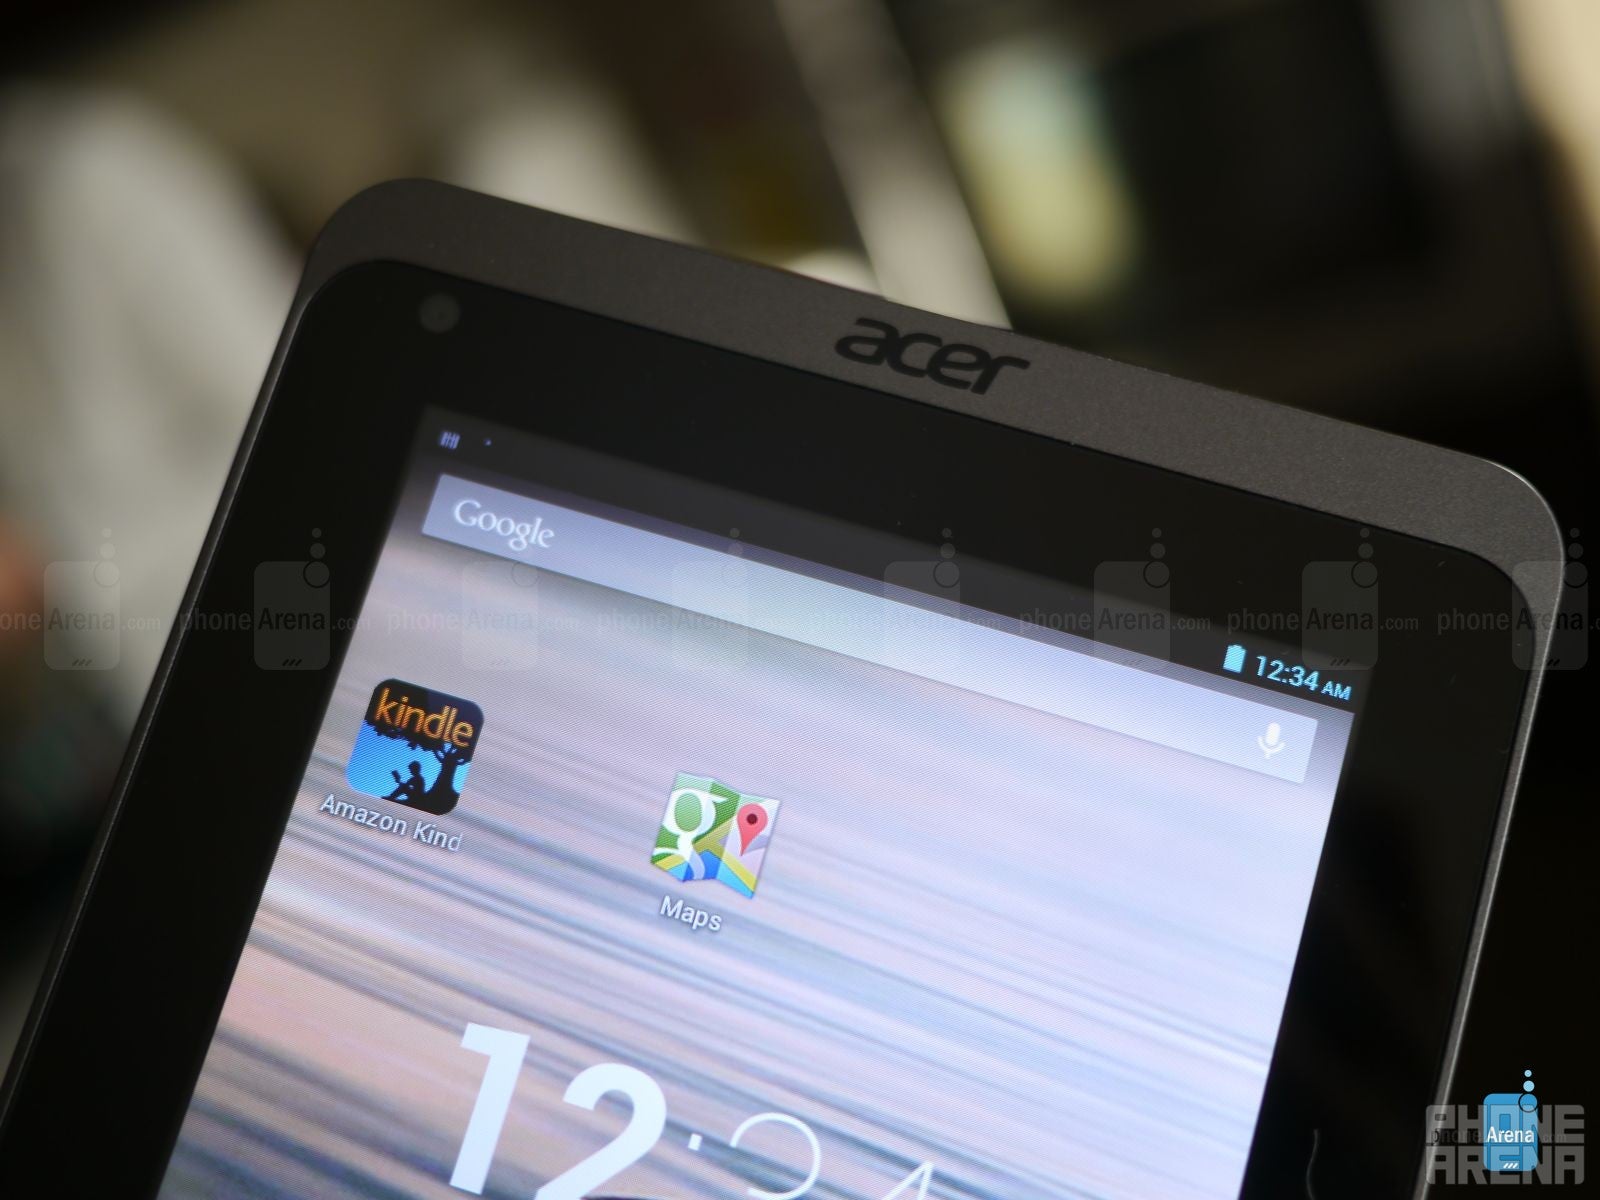 Acer Iconia B1-720 - Acer Iconia B1-720 hands-on